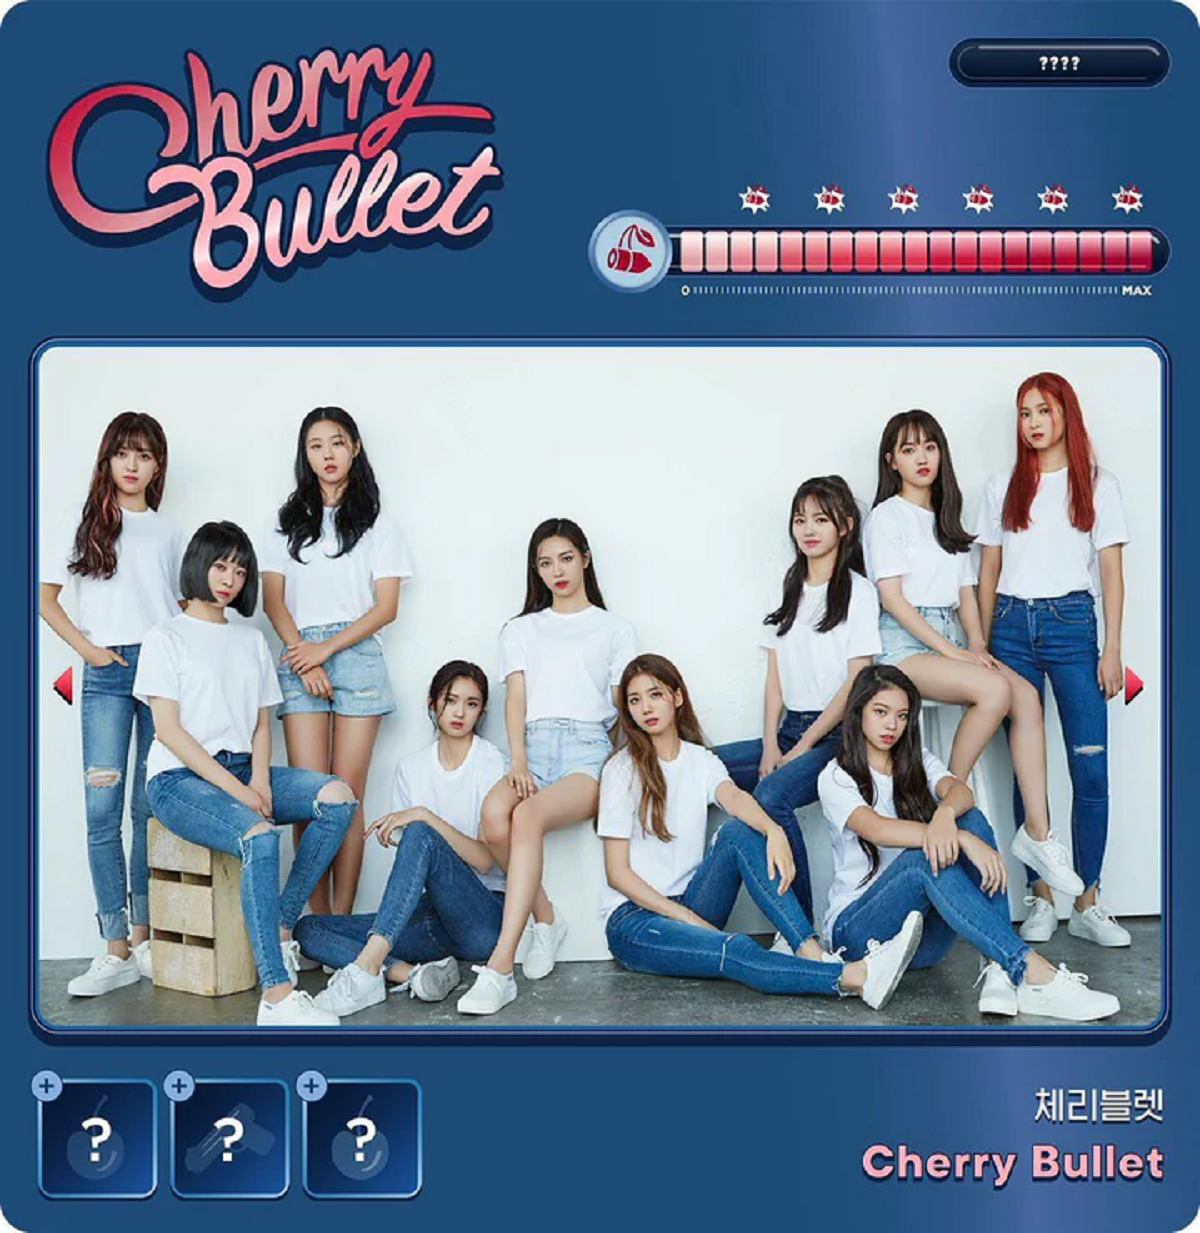 cherrybullet-lets-play-cherry-bullet-group-photo-white-tshirts-and-denim